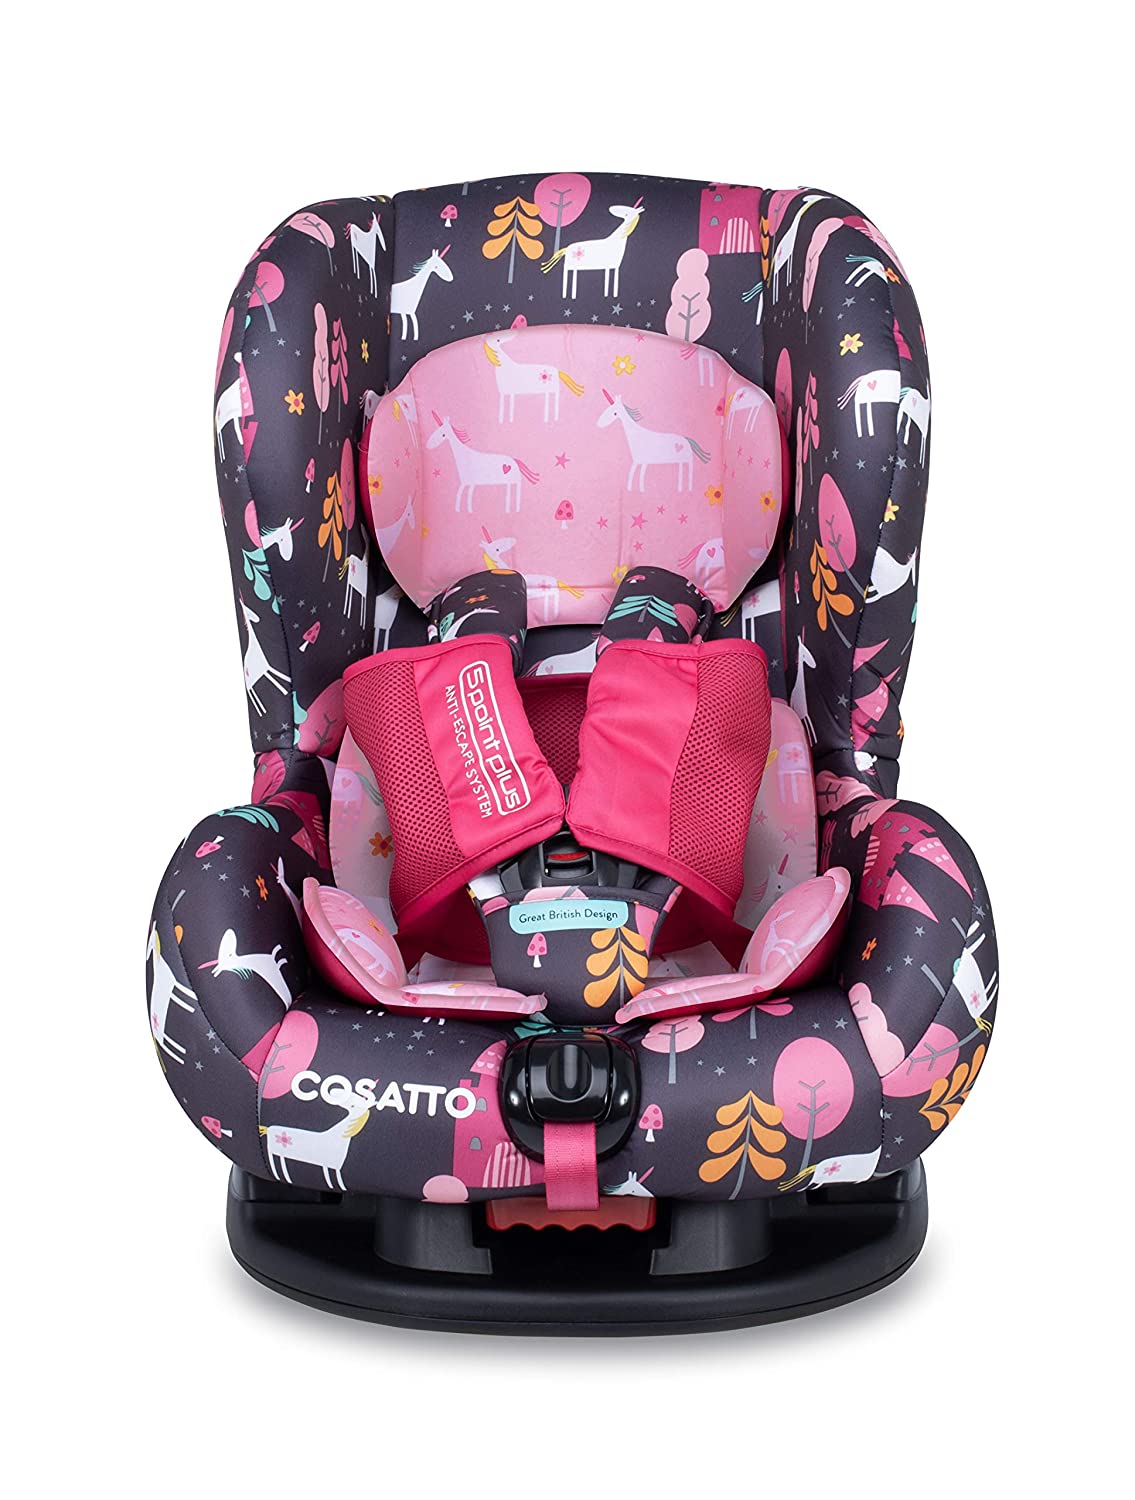 Cosatto Moova 2 Toddler Car Seat Group 1.9-18 kg, 9 Months-4 Years, Anti-escape, Forward with View Up, Unicorn Land